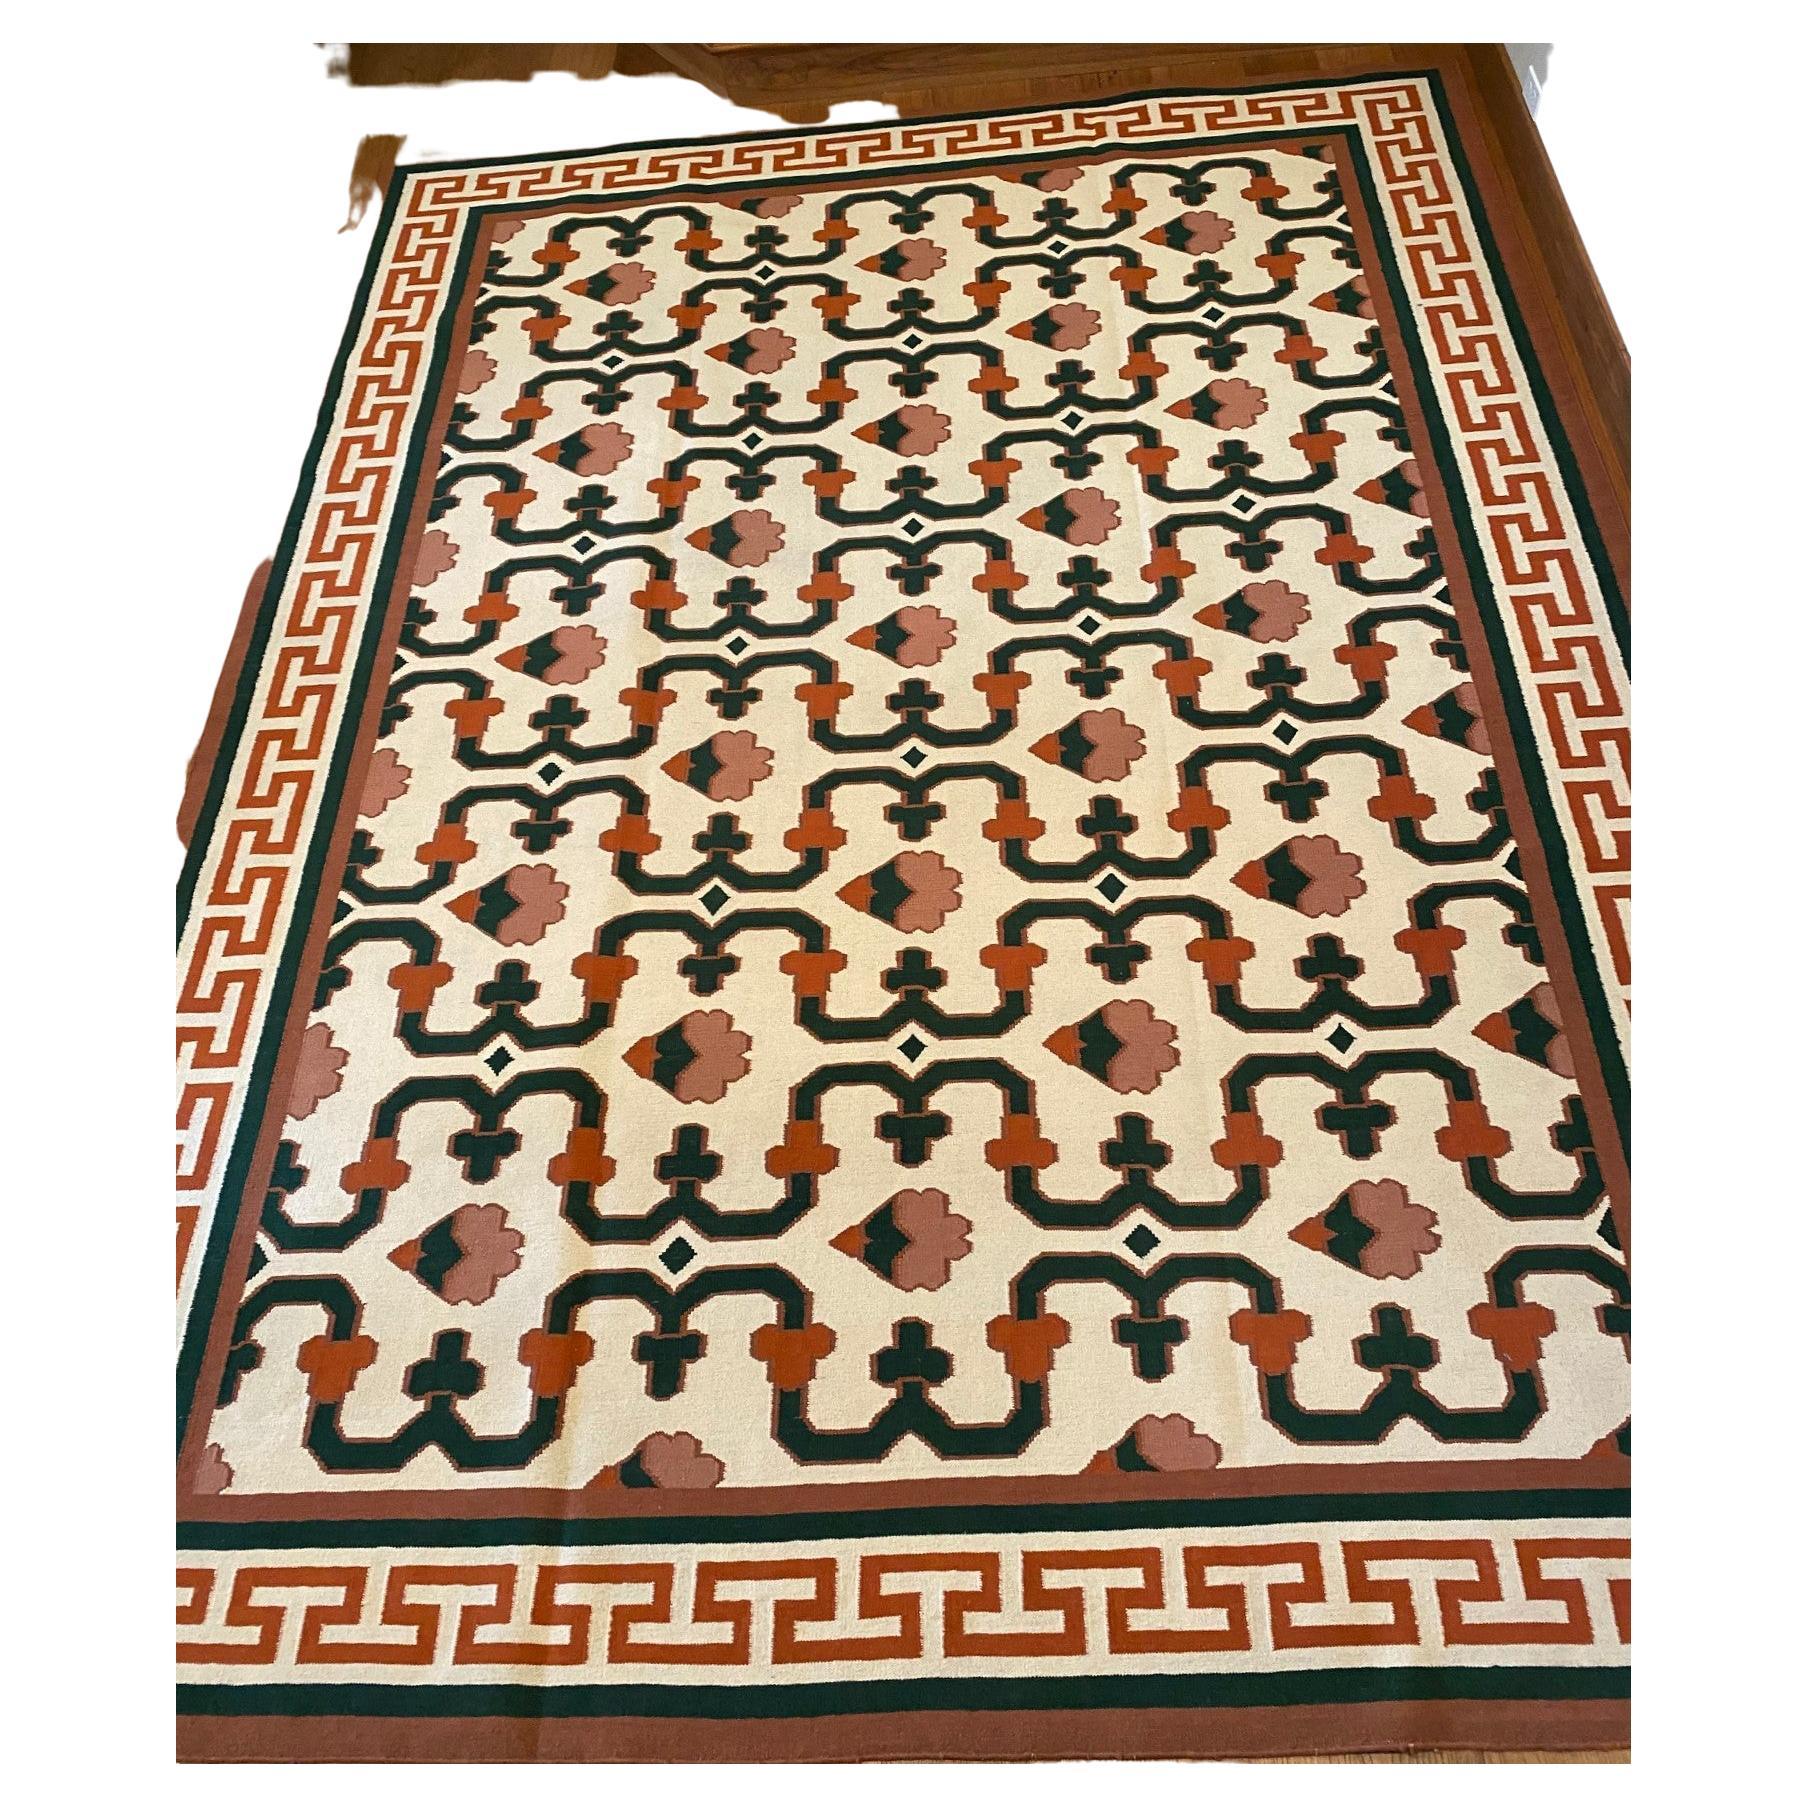 20th. c. Vintage hand-woven kilim rug. A crisp and sophisticated design with a Greek key border, this kilim has a striking colorway; ochre, forest green, orange and off white. Perfect for a garden room, office, library or dining room.

Kilim rugs